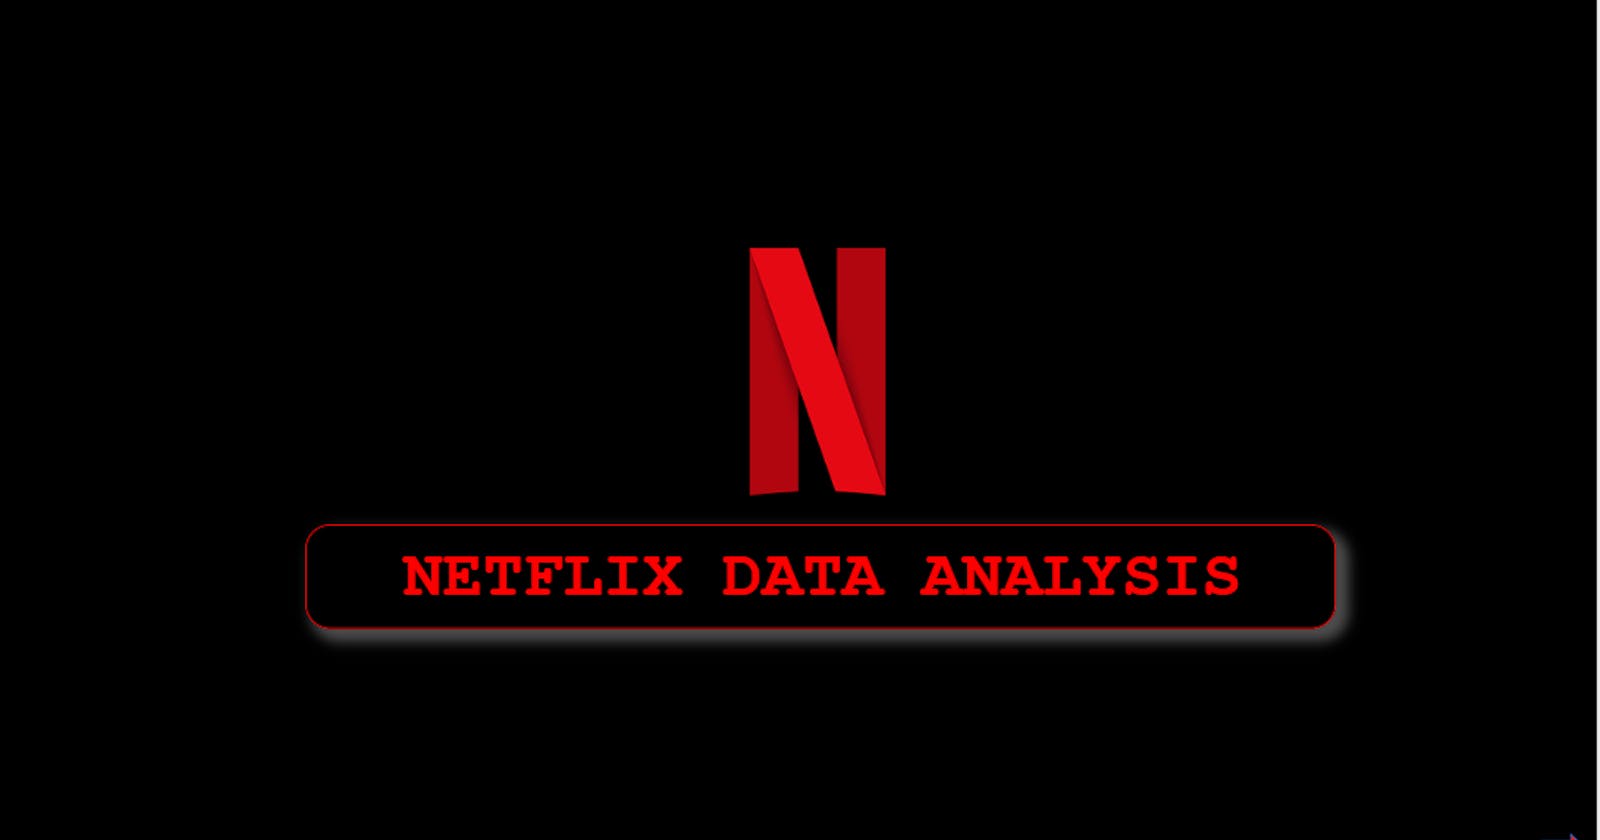 NETFLIX ANALYSIS(project 2 and experience)